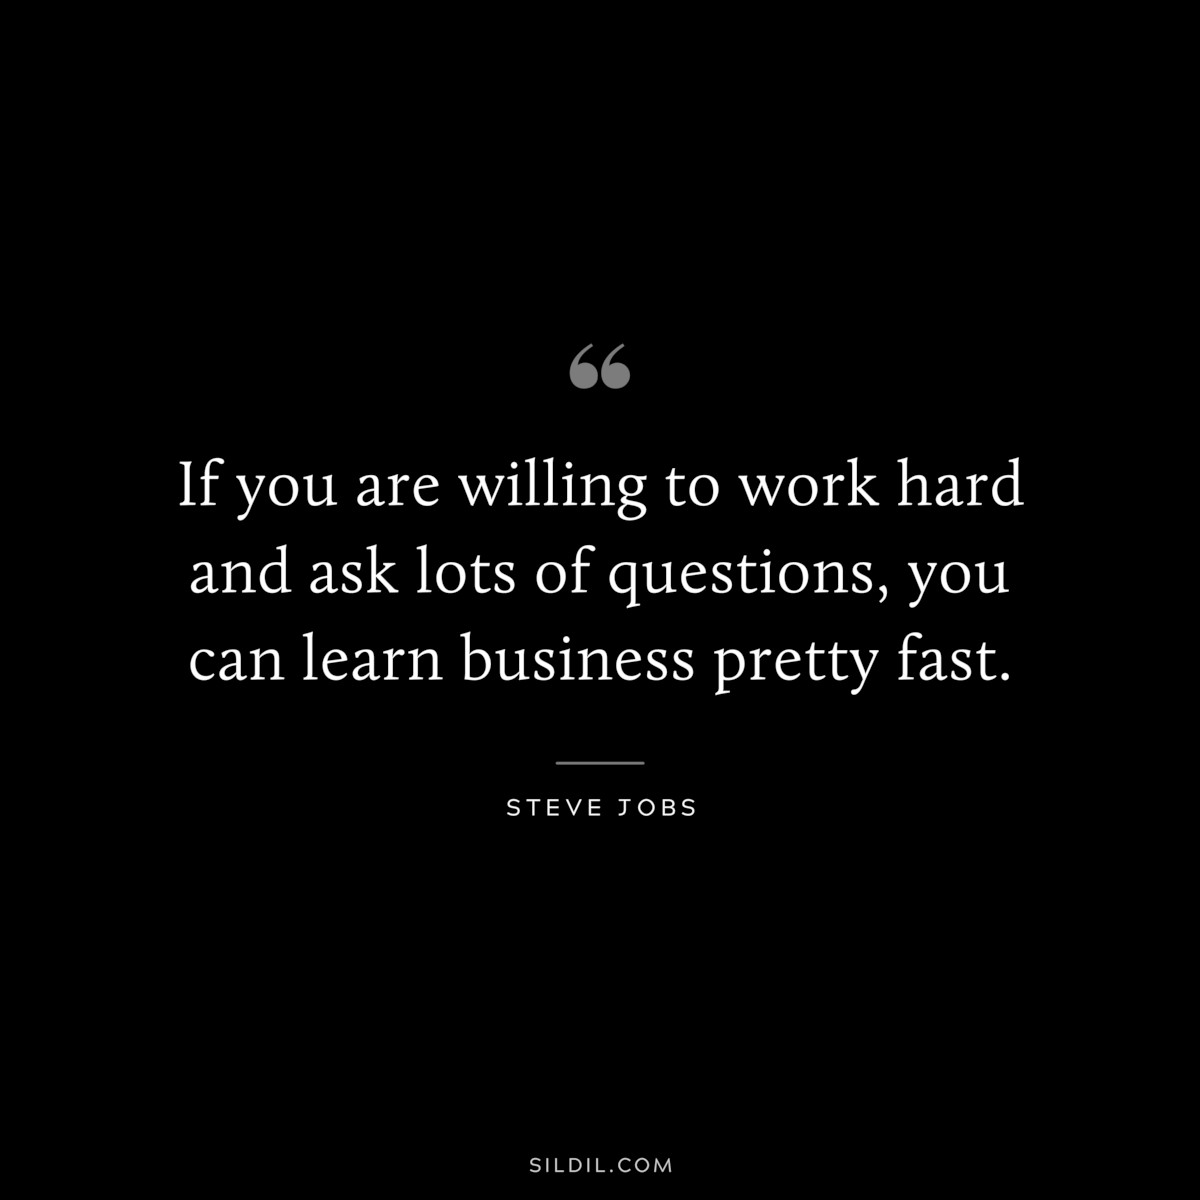 If you are willing to work hard and ask lots of questions, you can learn business pretty fast. ― Steve Jobs